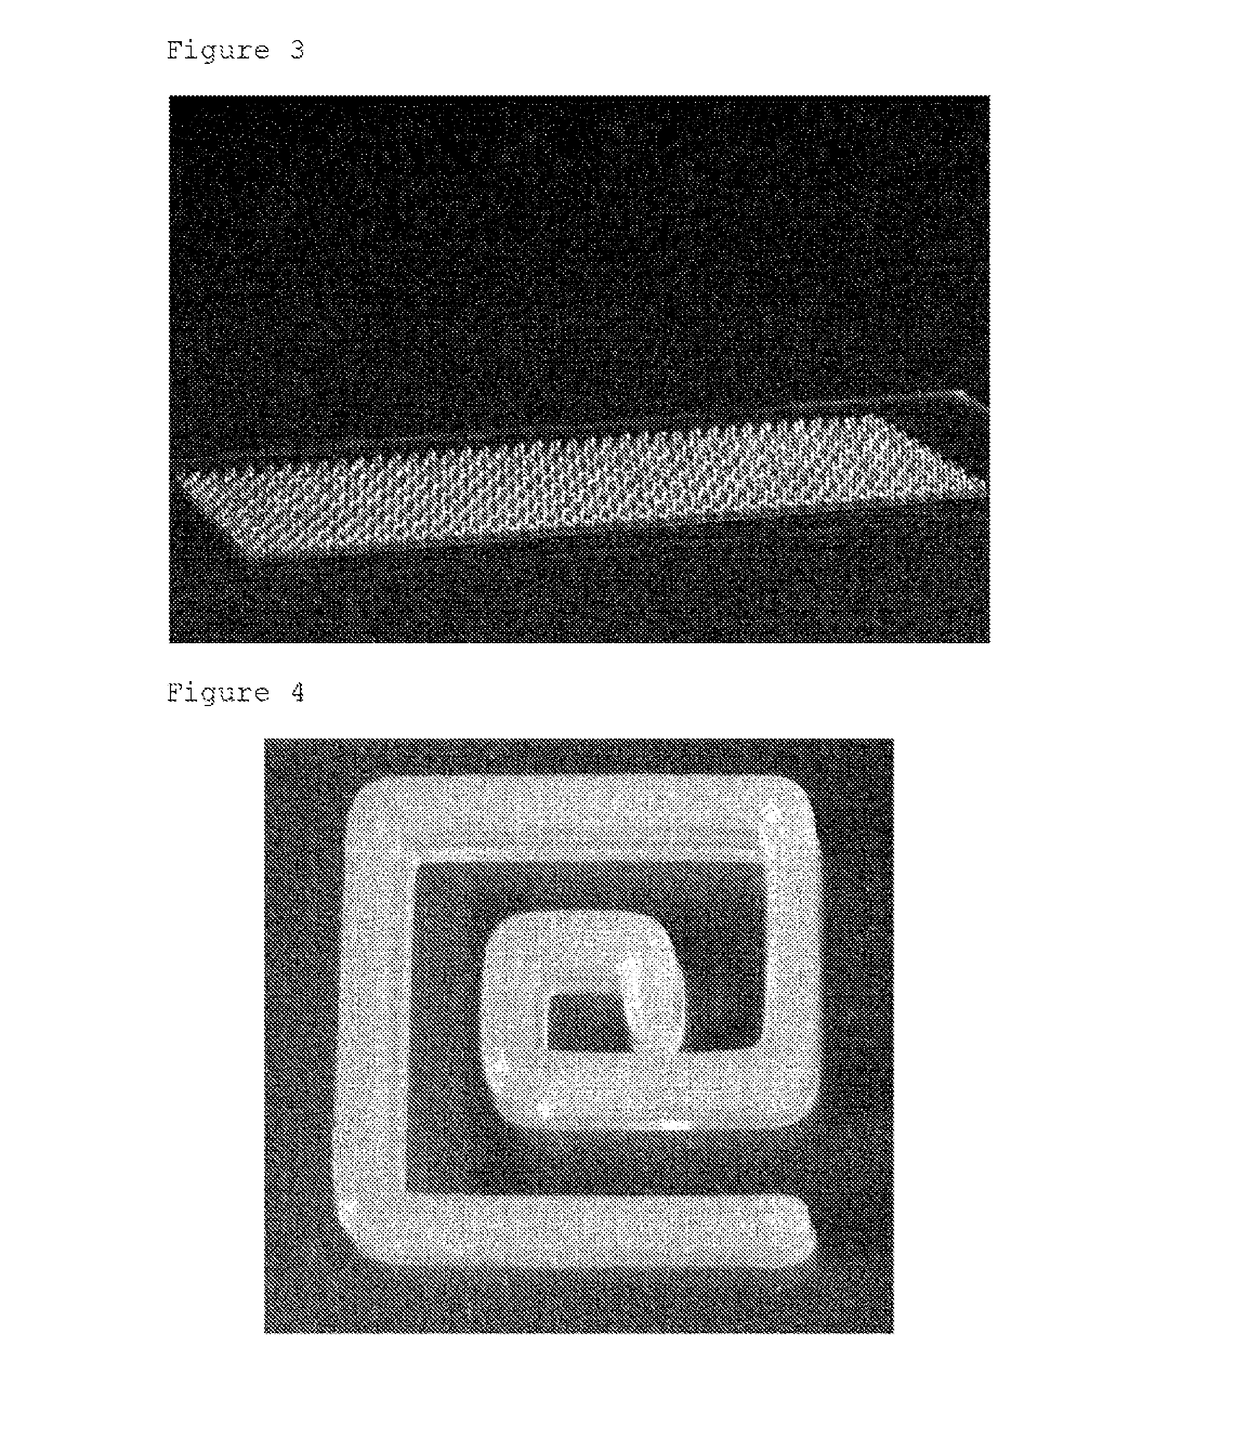 Silicone compositions for producing elastomeric molded parts by means of ballistic methods